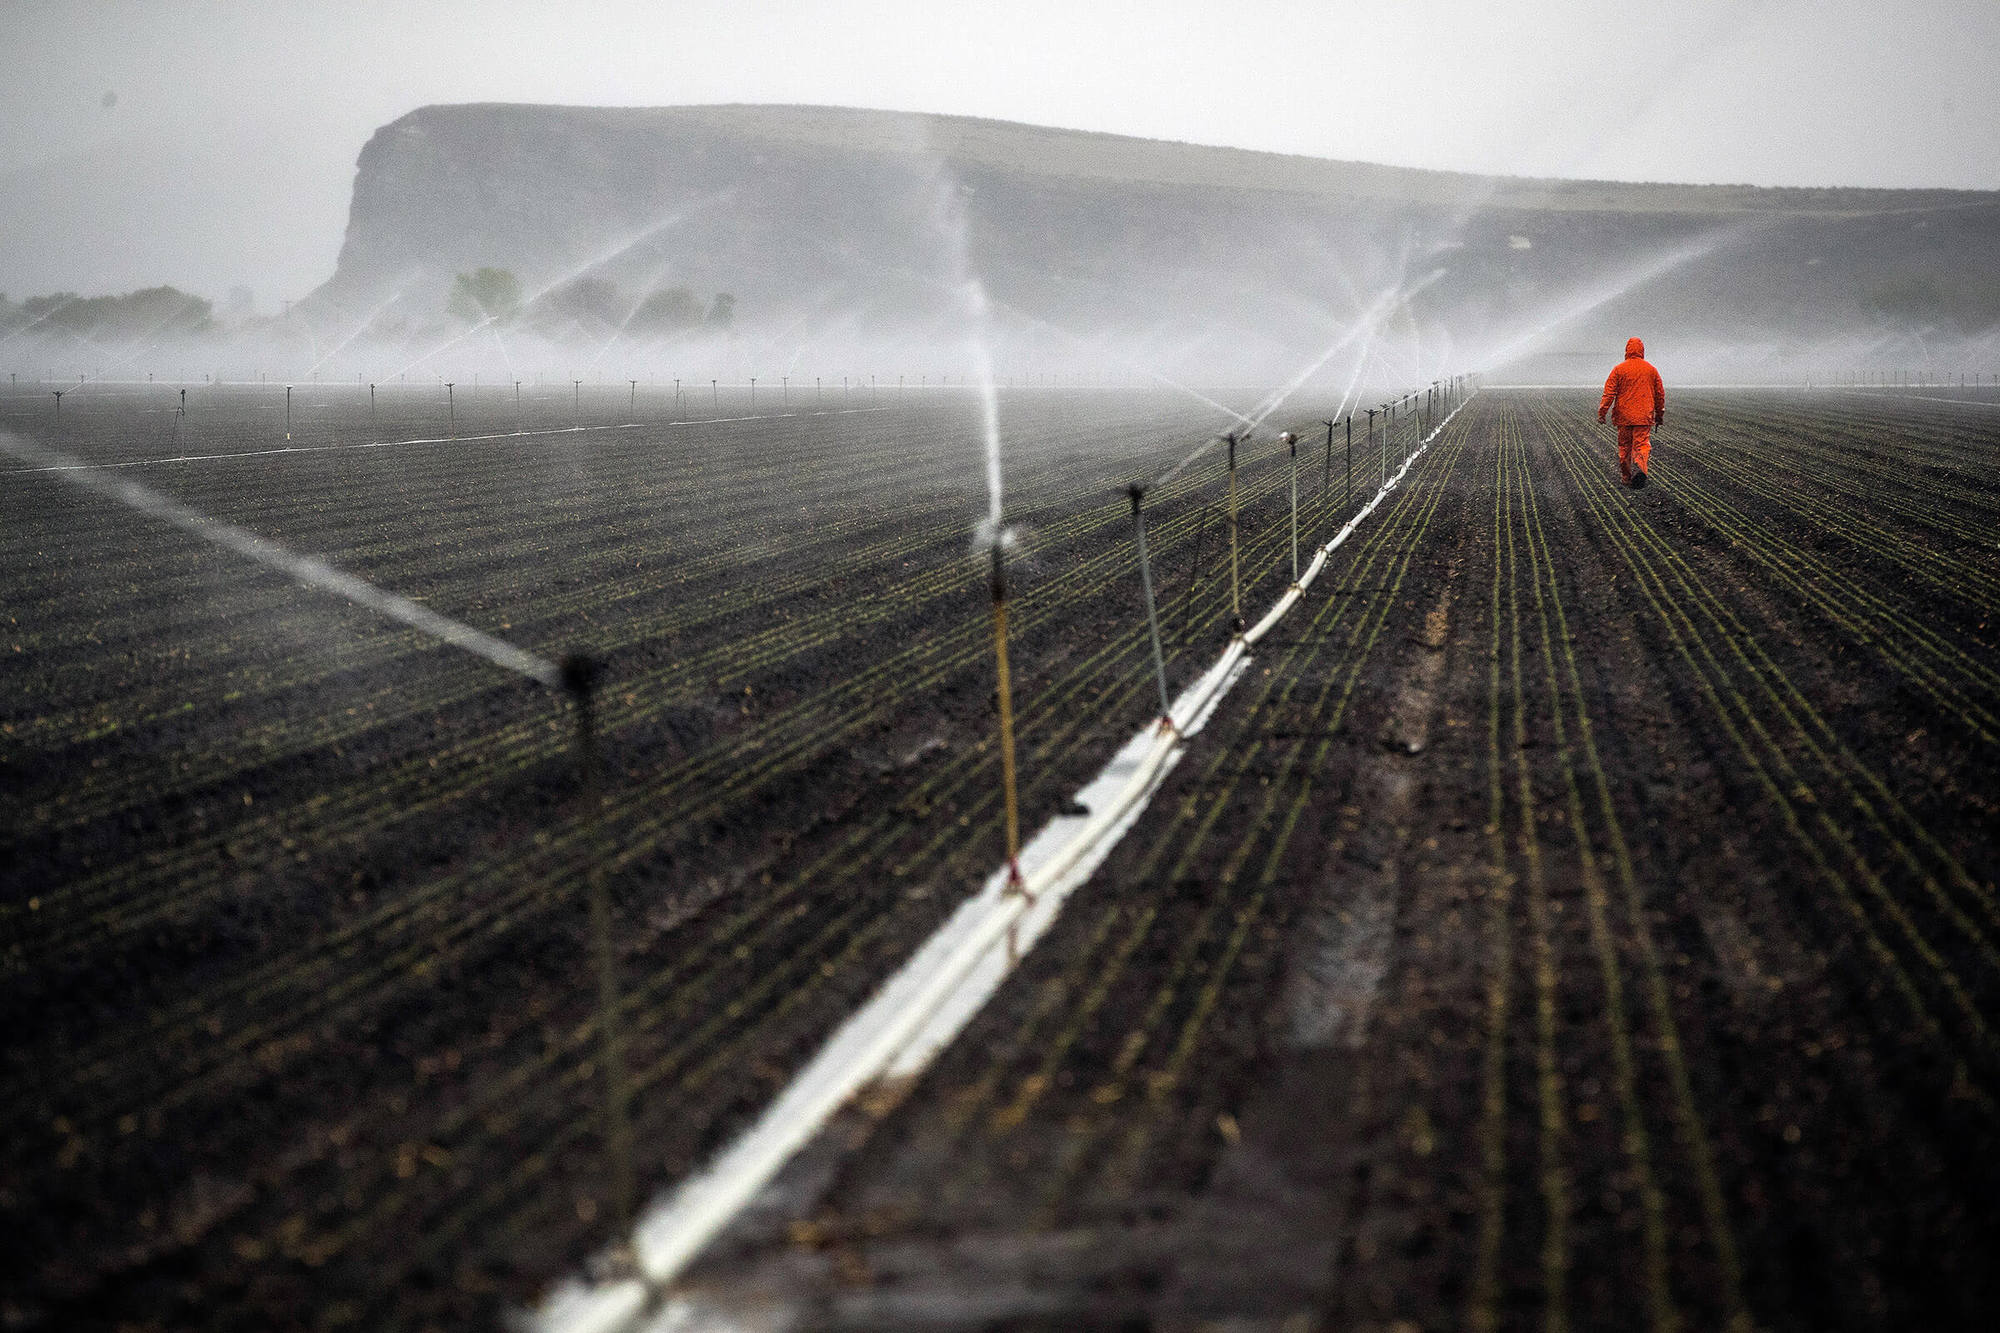 A farmworker working for Scott Seus out at dawn checking sprinkler operation on his farm in the Klamath Basin outside Tulelake, Calif., on Monday, May 18, 2020.